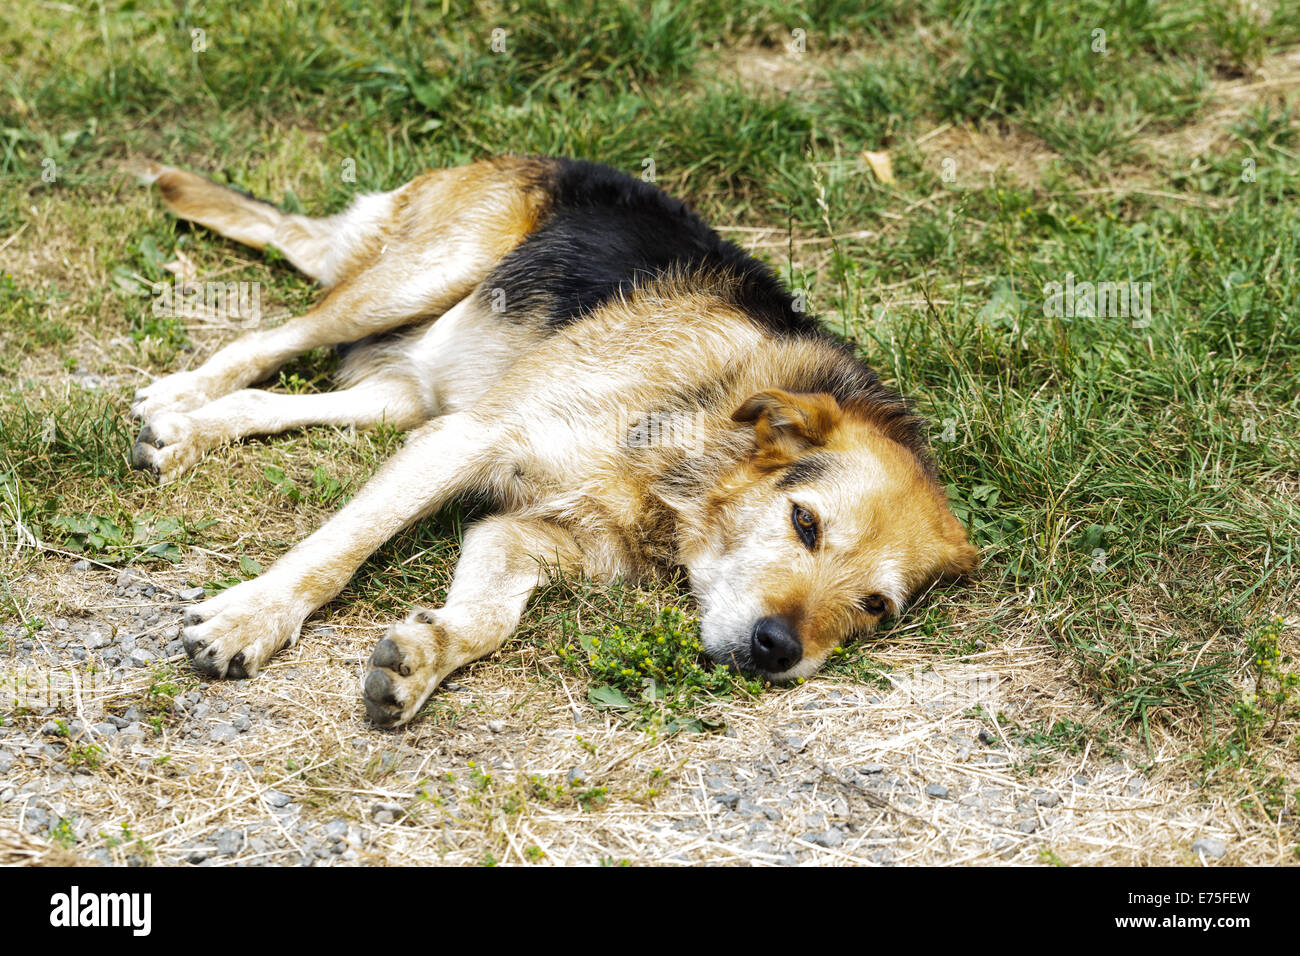 Shaggy brown and black Sheep Dog lying down in grass Stock Photo